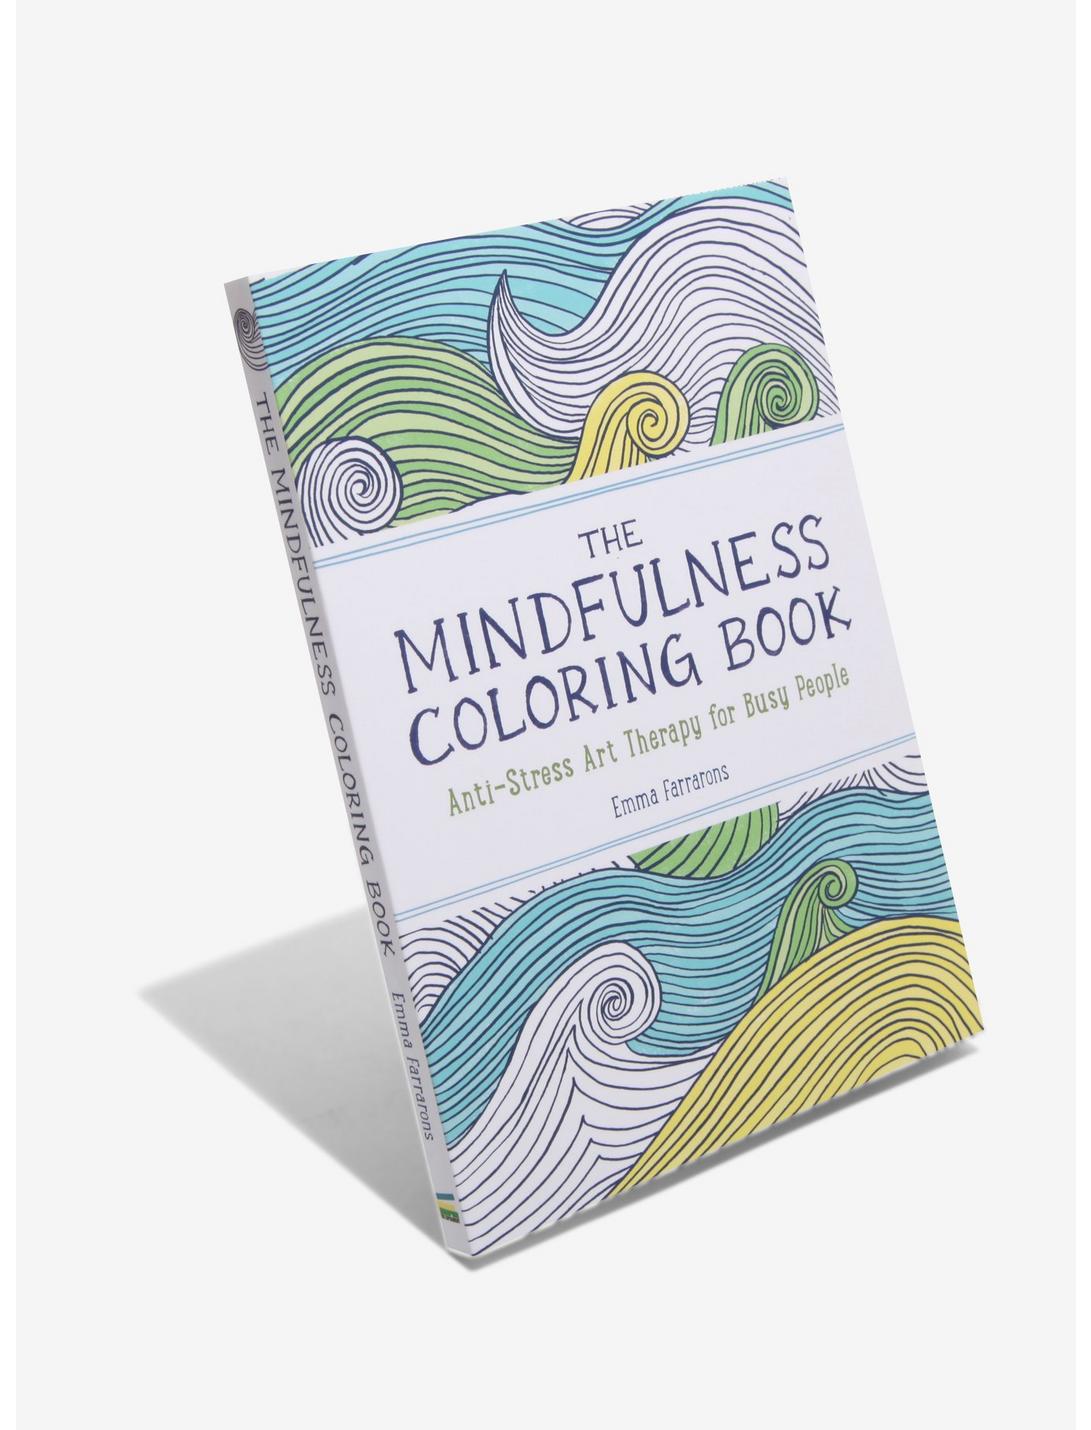 Mindfulness Coloring Book: Anti-Stress Art Therapy For Busy People, , hi-res